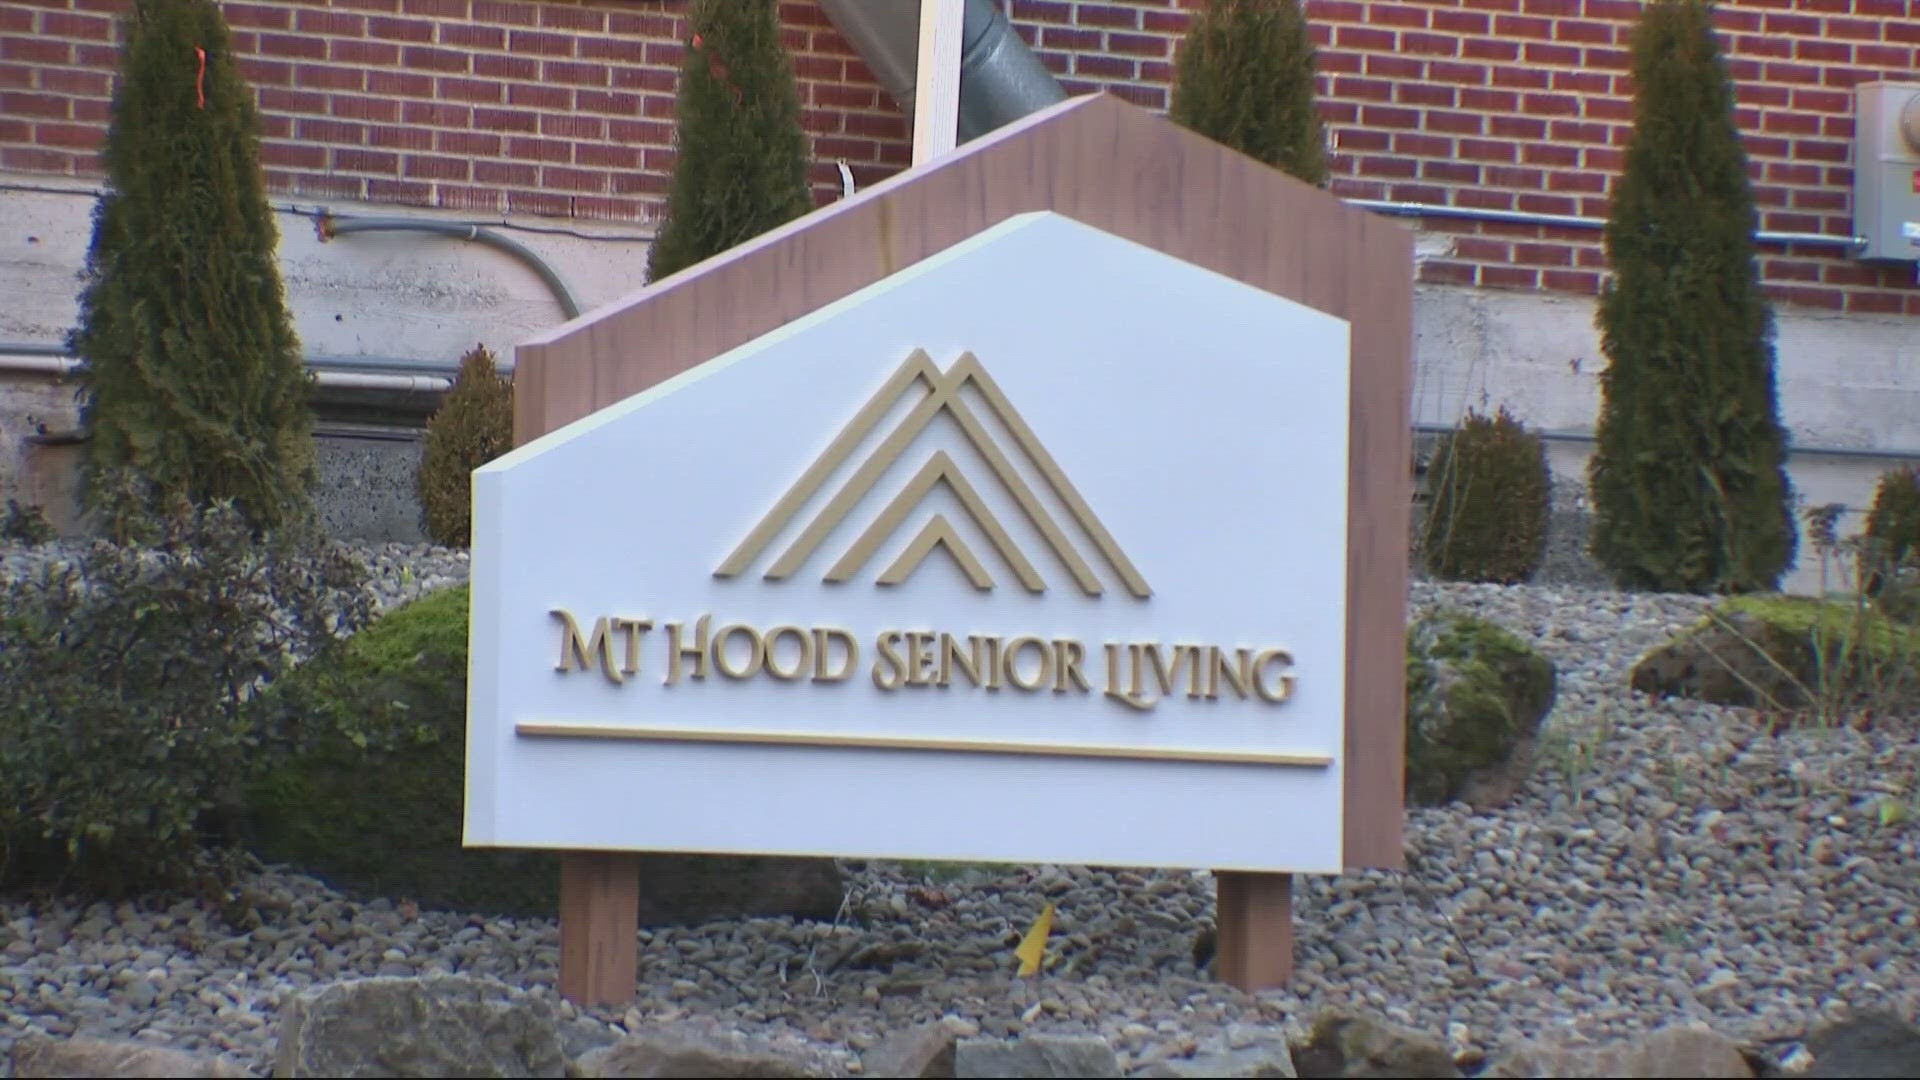 The family of an 83-year-old woman who died half a mile from Mt Hood Senior Living has filed a wrongful death suit, saying the facility's failures led to her death.